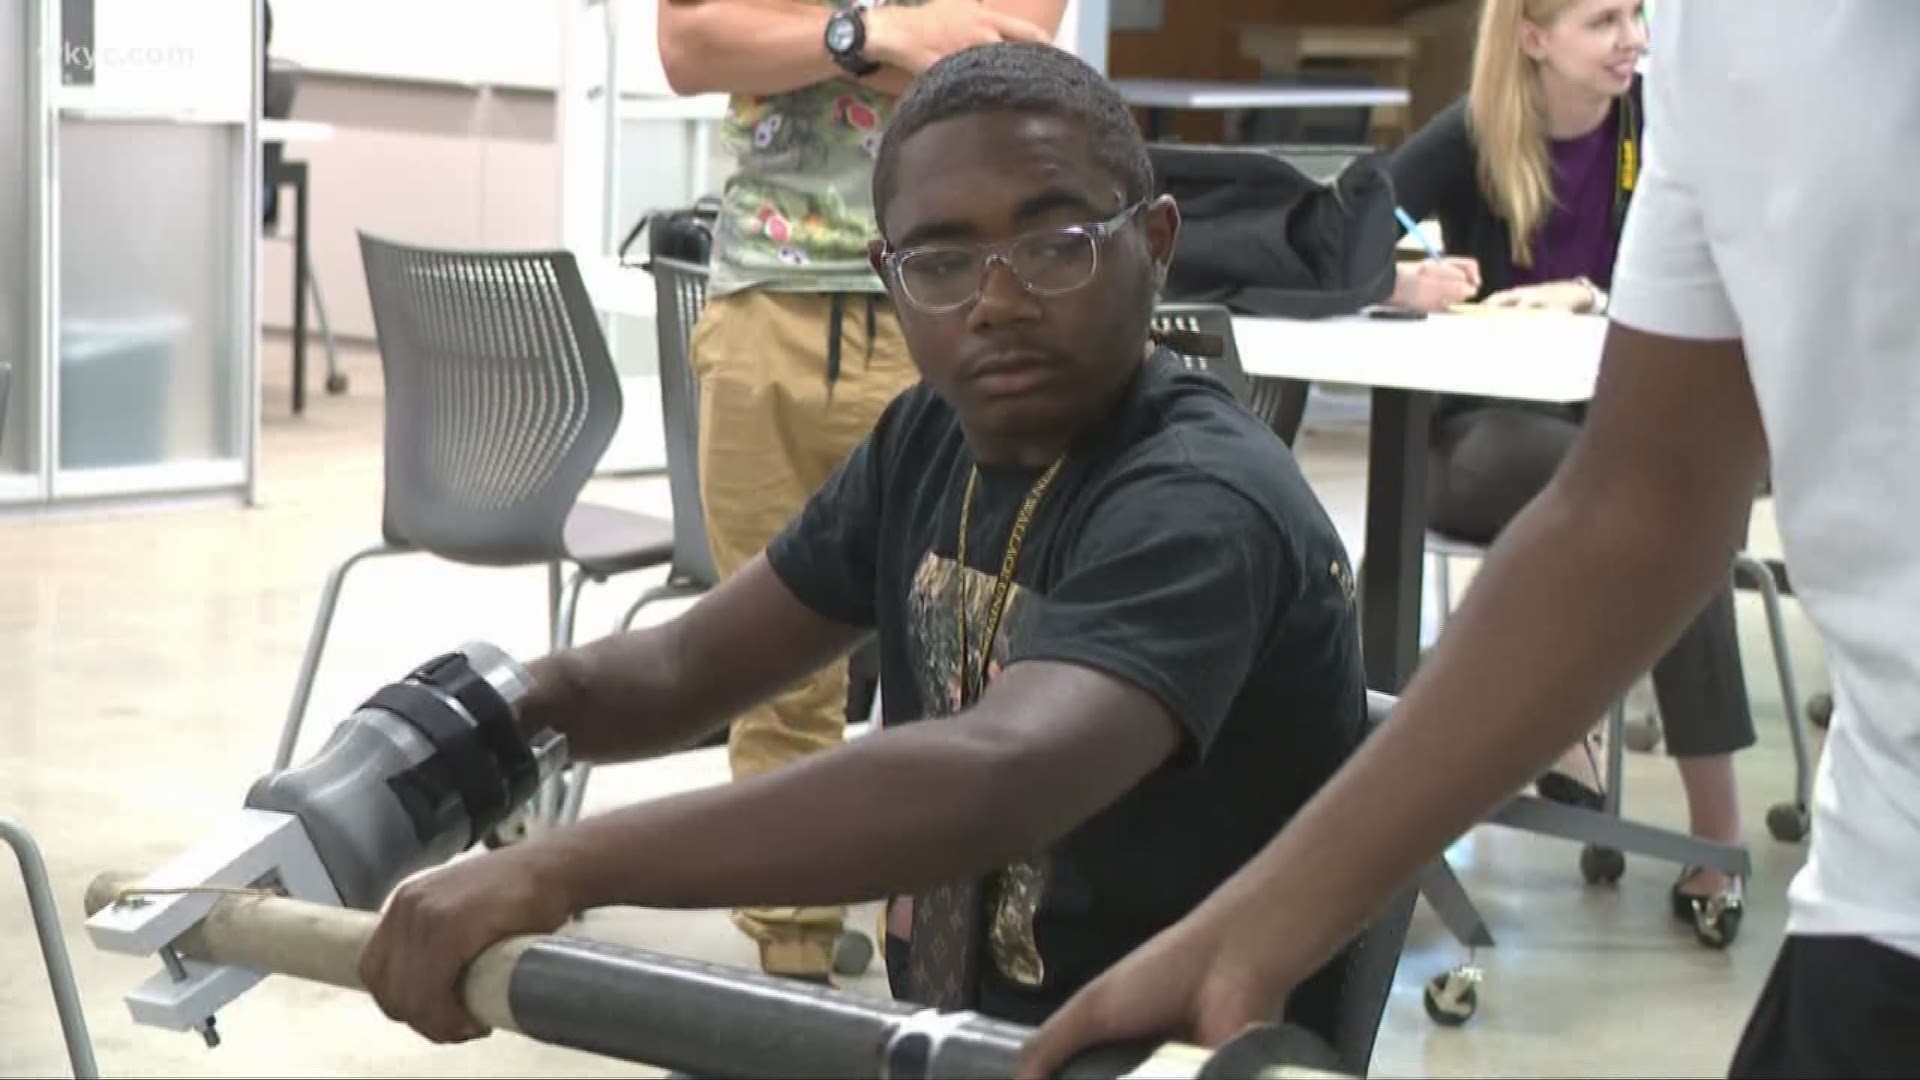 Local students help classmates fit in through class project